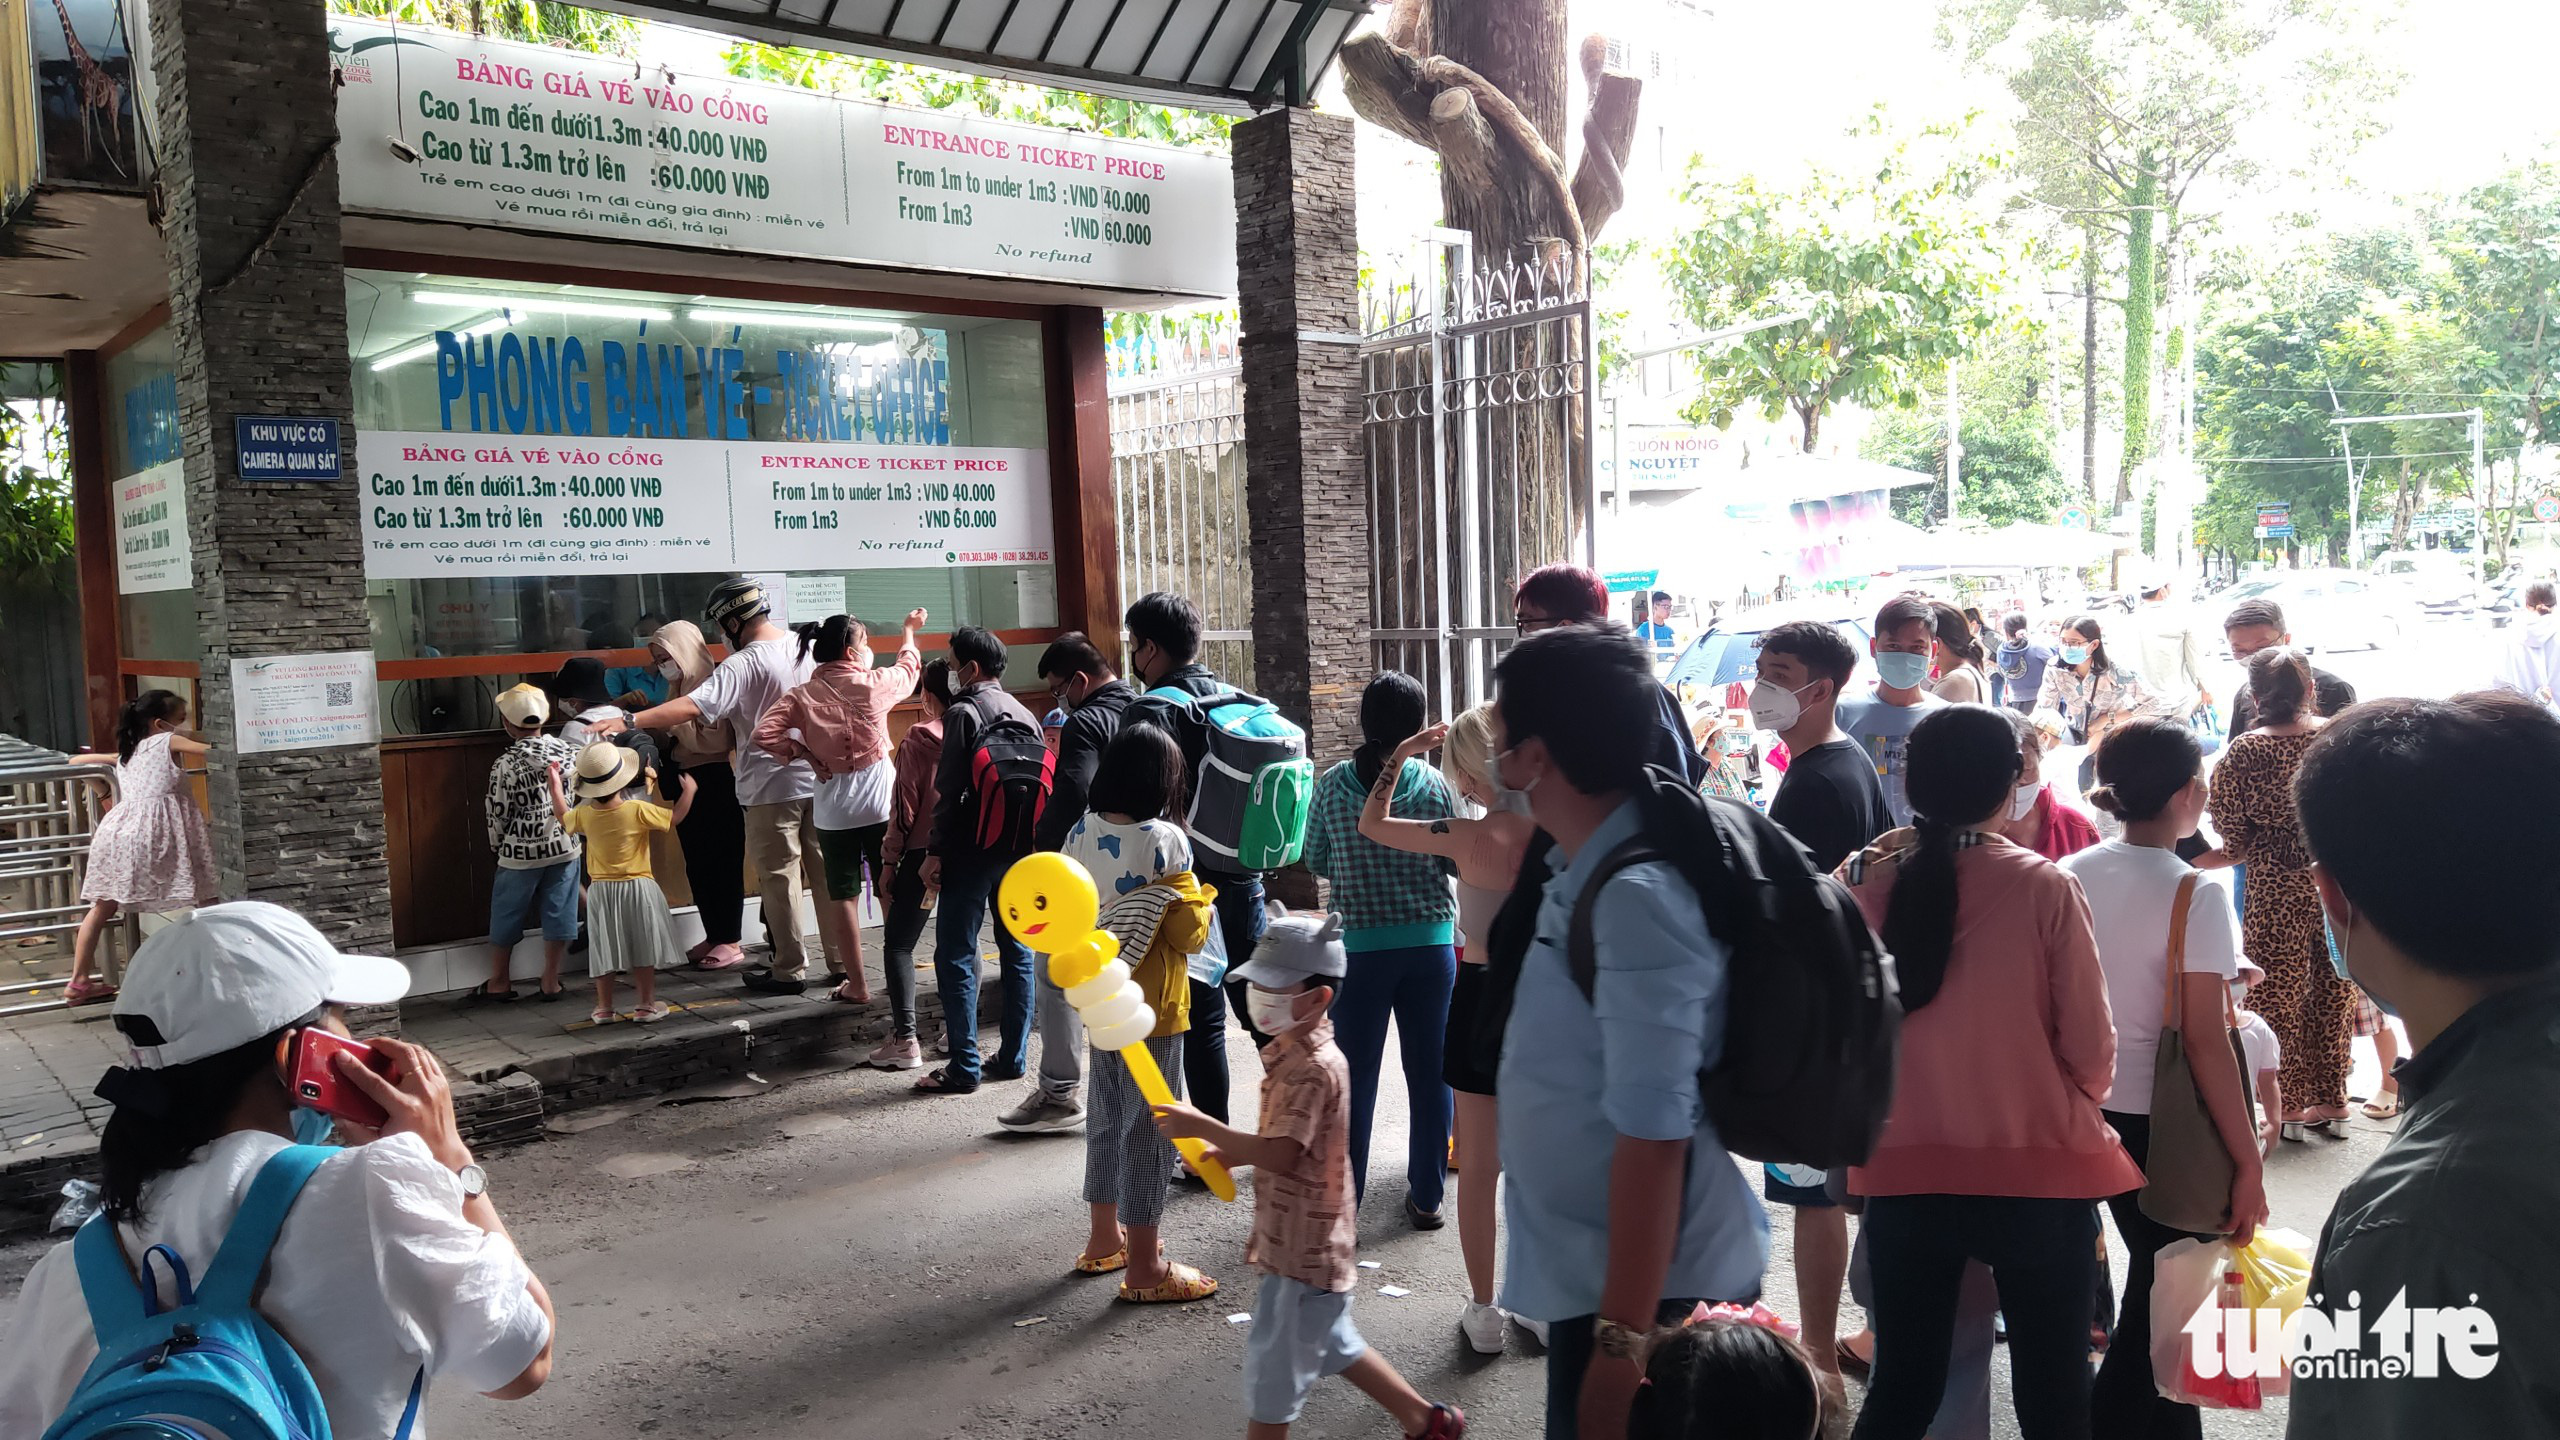 People queue at a ticket booth at Saigon Zoo and Botanical Gardens in District 1, Ho Chi Minh City, July 17, 2022. Photo: N. Tri / Tuoi Tre